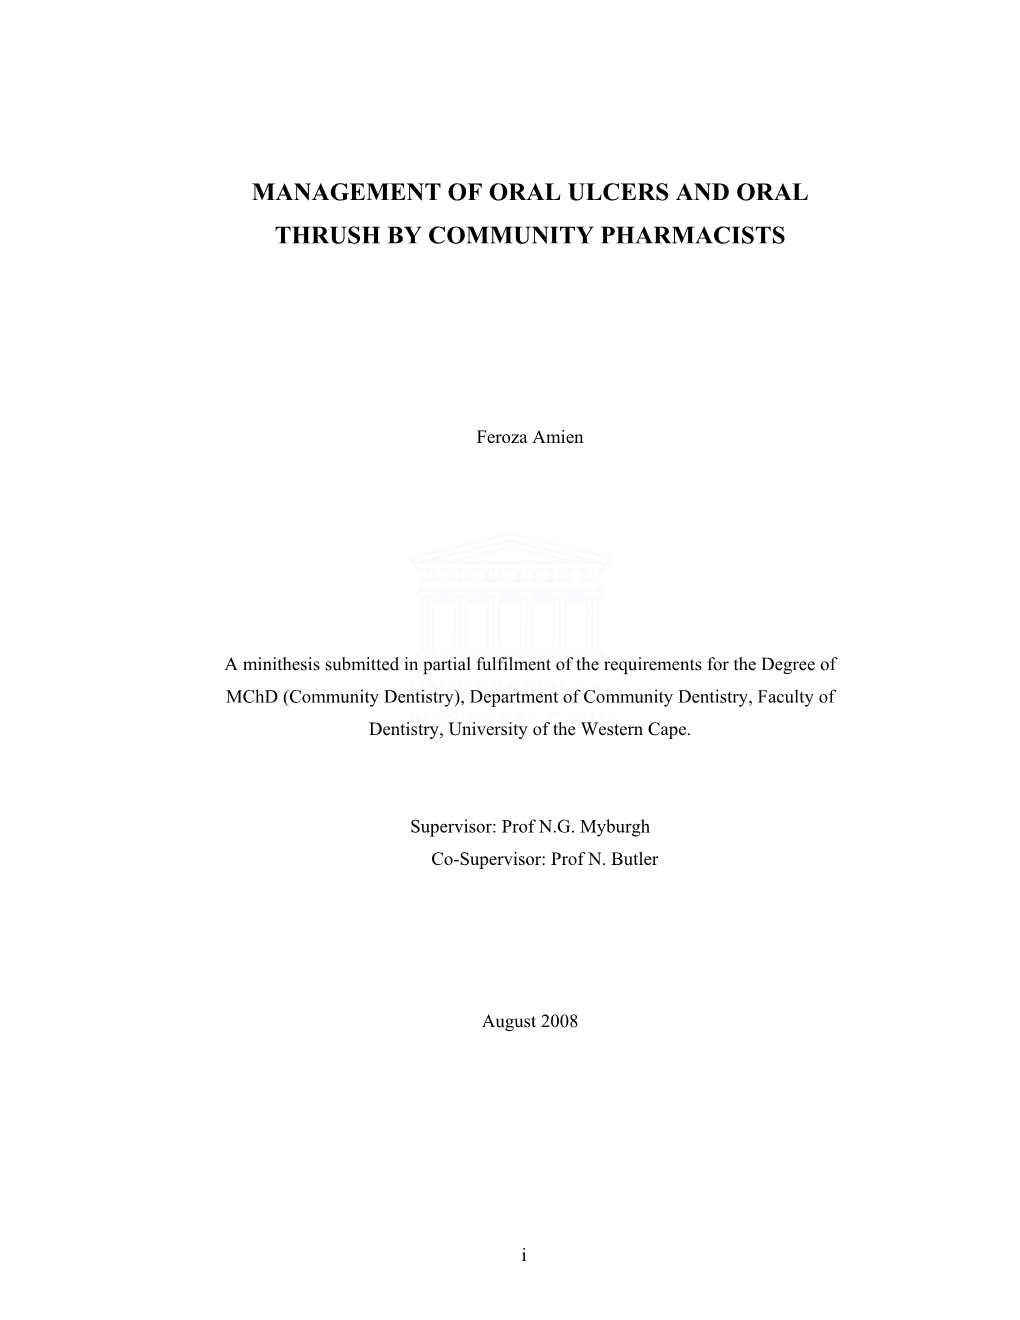 Management of Oral Ulcers and Oral Thrush by Community Pharmacists F